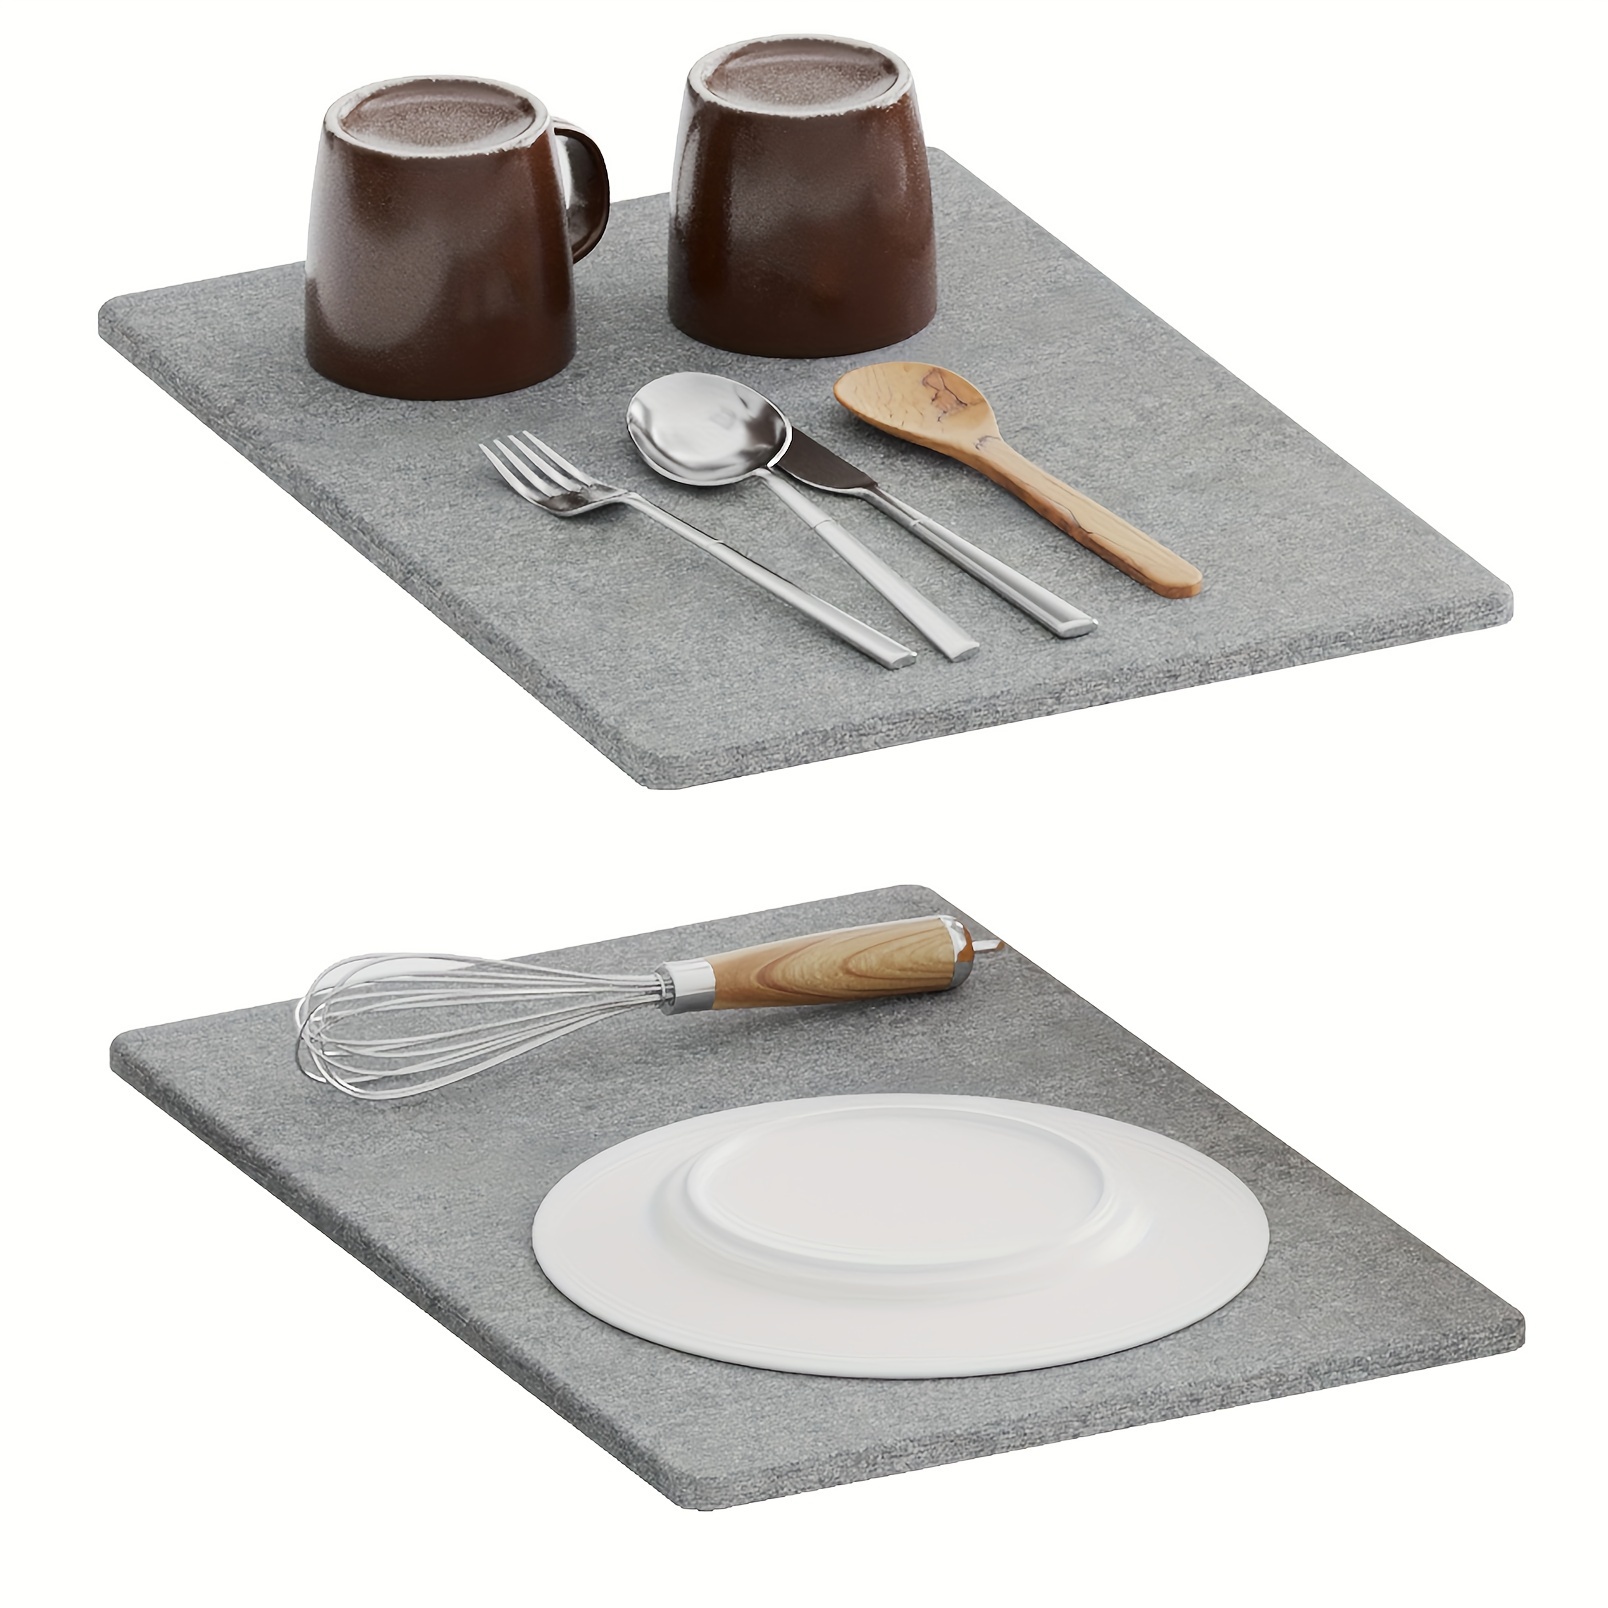 

Instant Dry Stone Mat 2 Pack, Diatomaceous Earth Drying Board For Kitchen Counters, Stone Dish Drainer